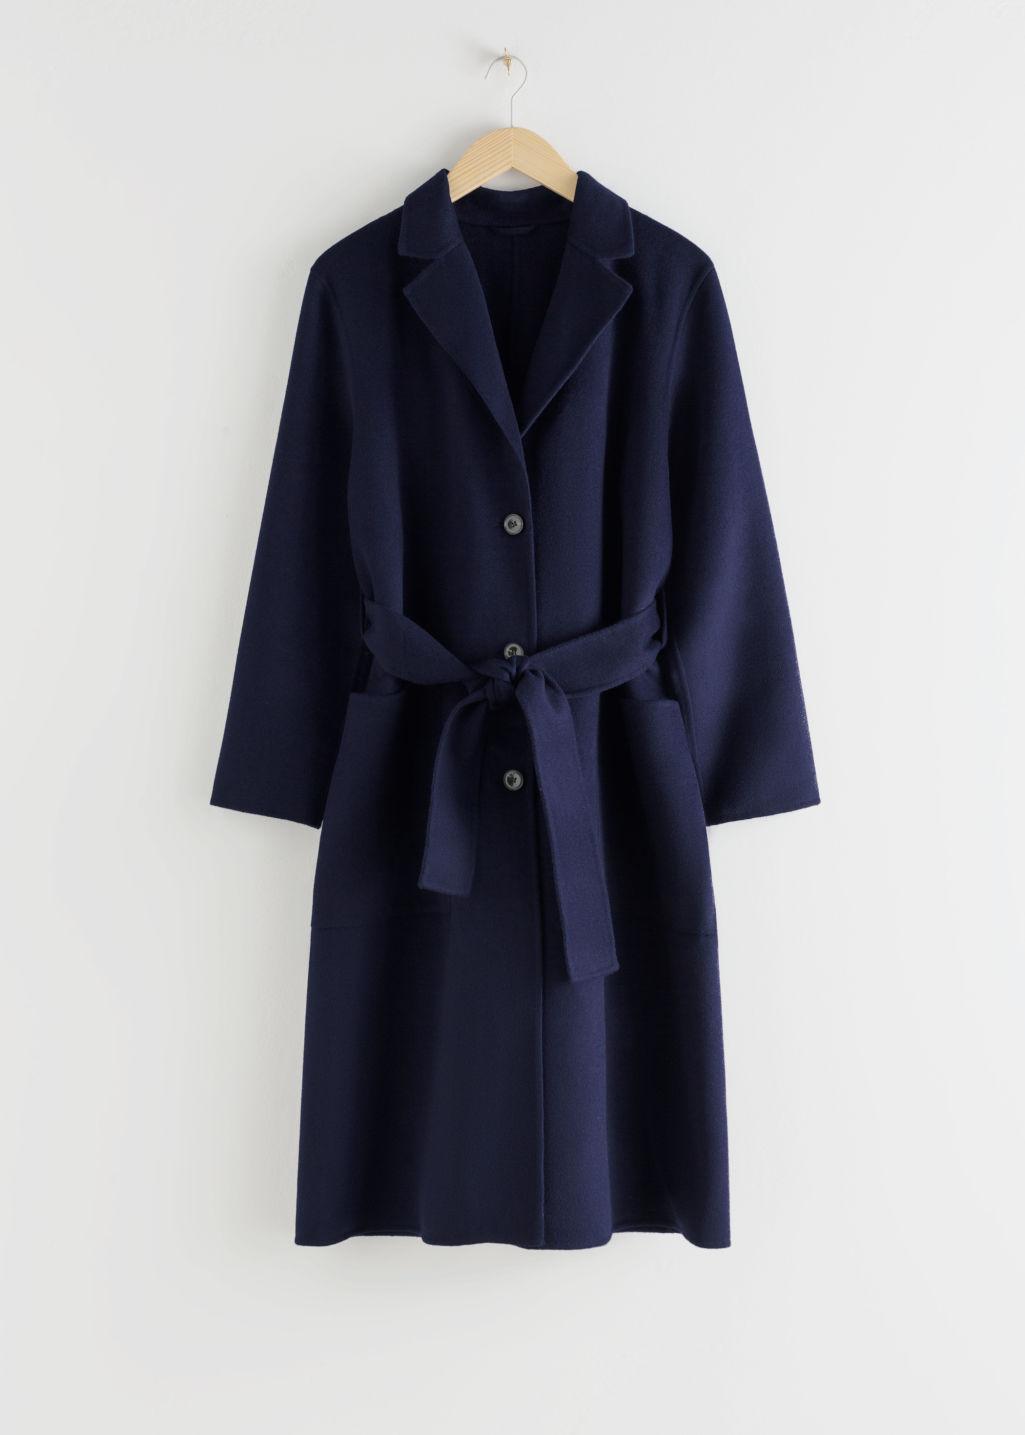 & Other Stories Wool Blend Belted Long Coat in Blue - Lyst